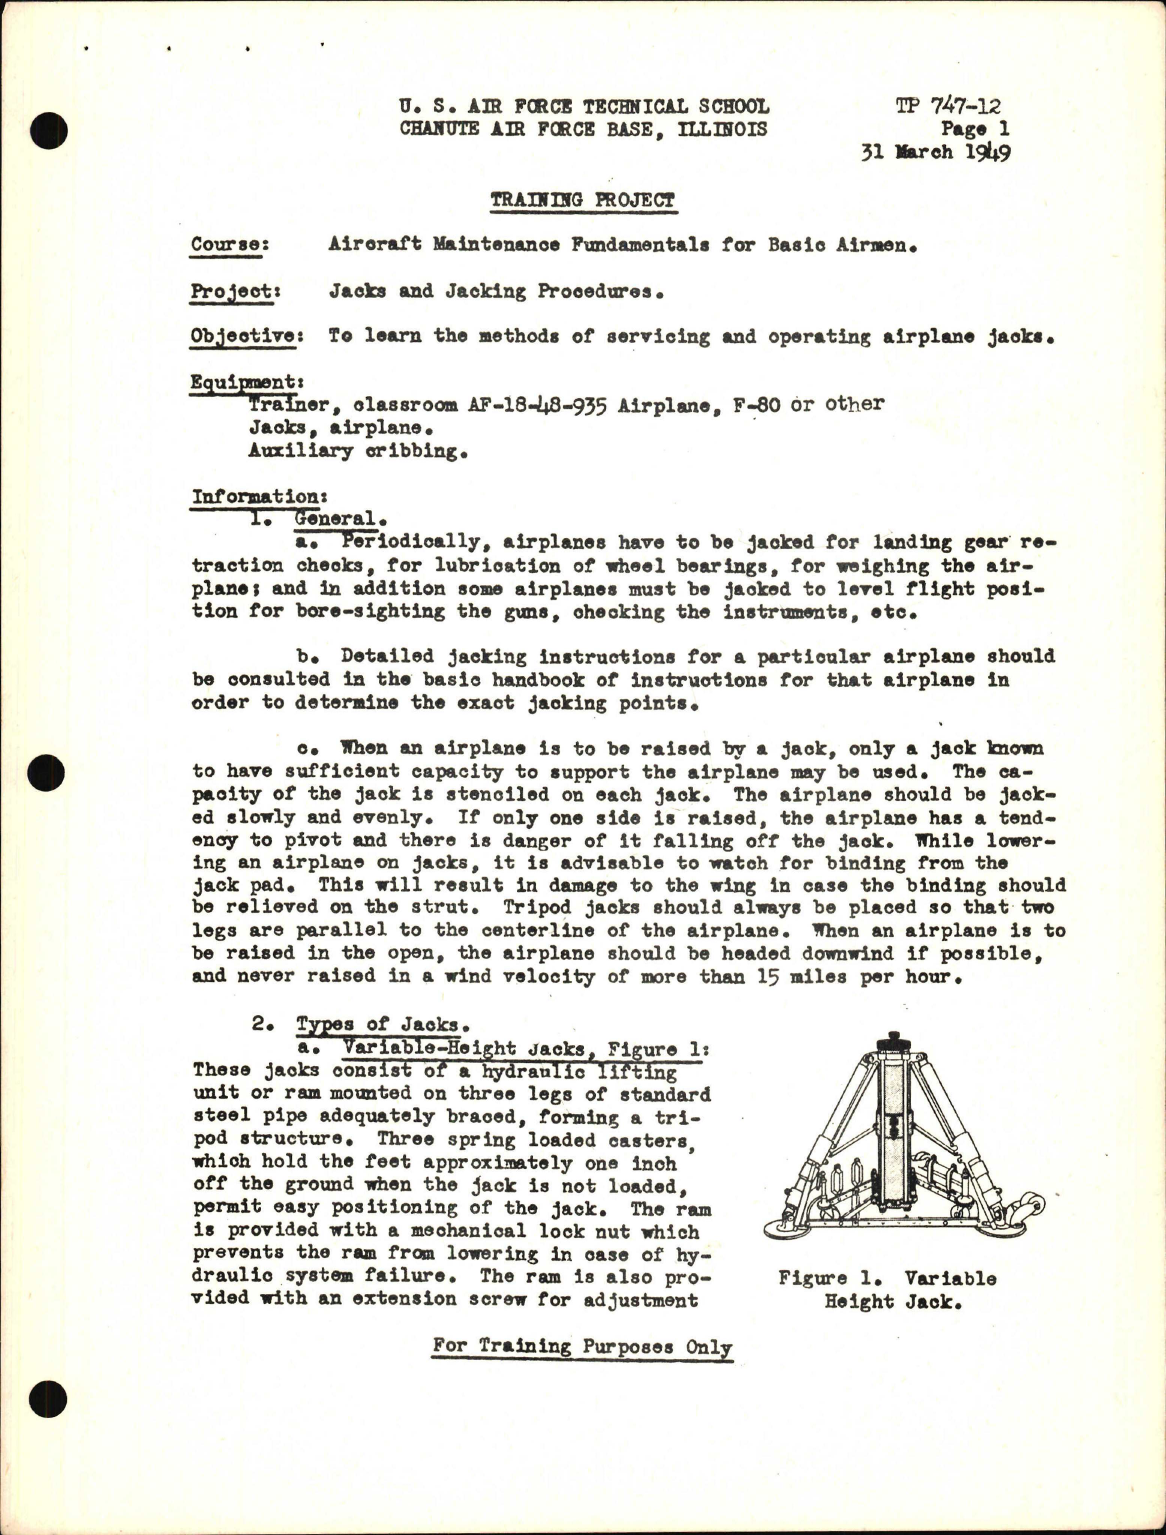 Sample page 1 from AirCorps Library document: Training Project, Jacks and Jacking Procedures